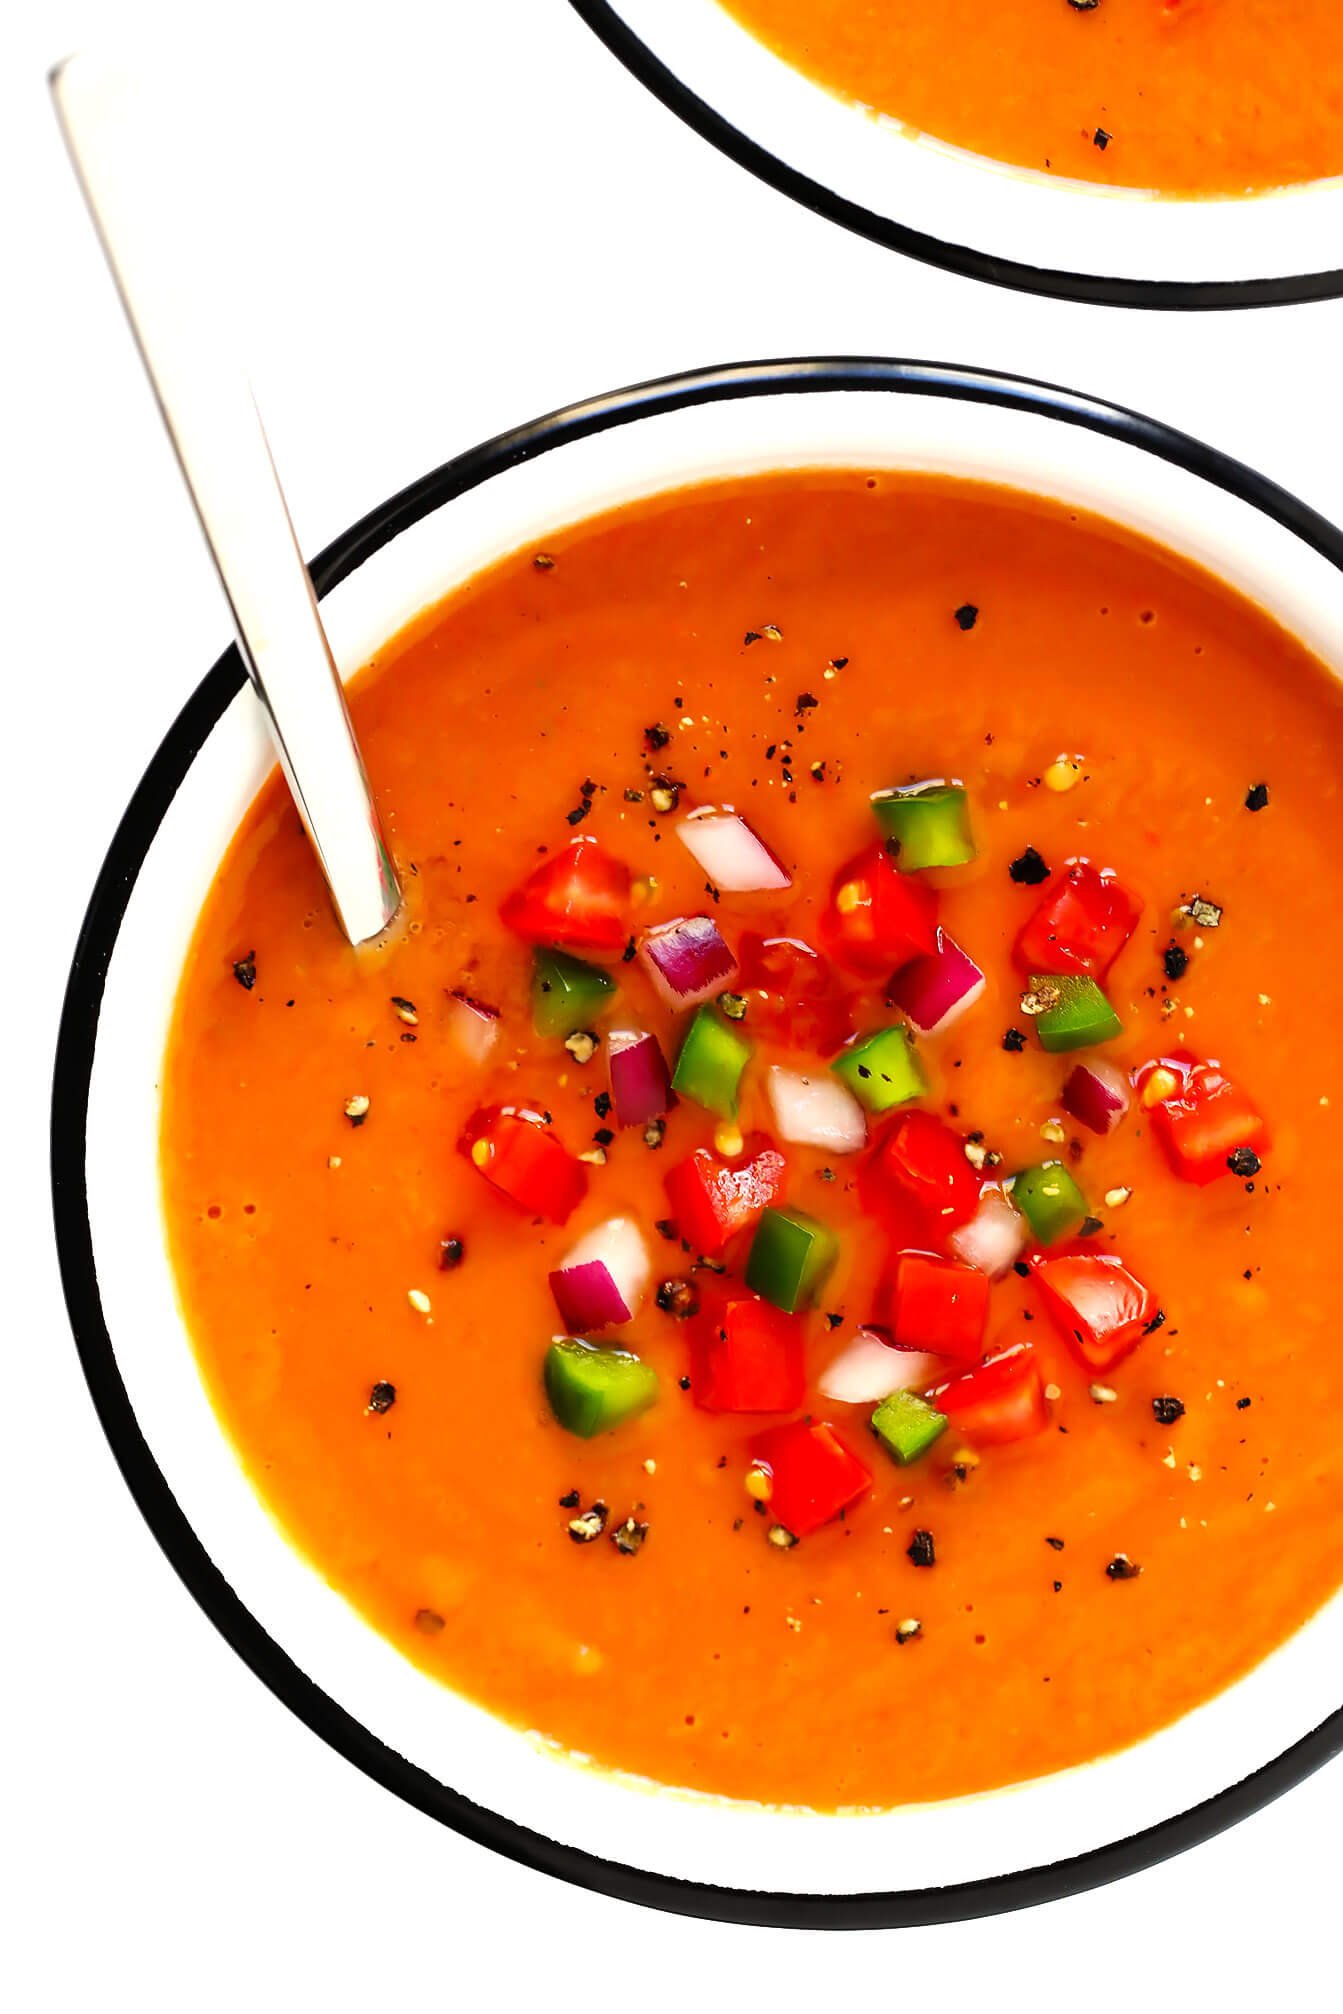 Bowl of Spanish gazpacho, topped with tomato, green pepper and red onion